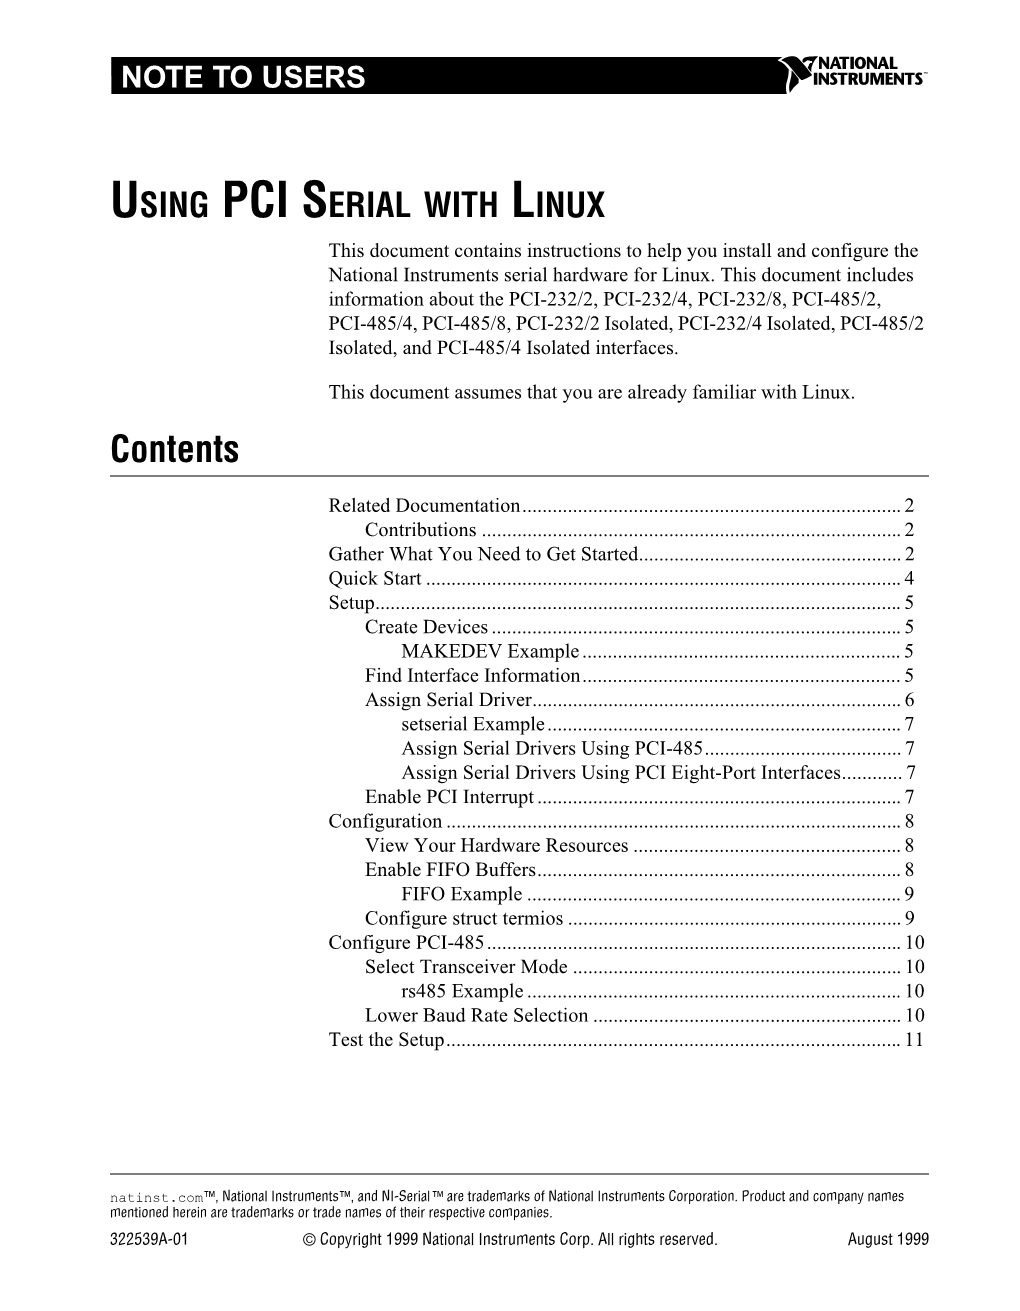 USING PCI SERIAL with LINUX This Document Contains Instructions to Help You Install and Configure the National Instruments Serial Hardware for Linux